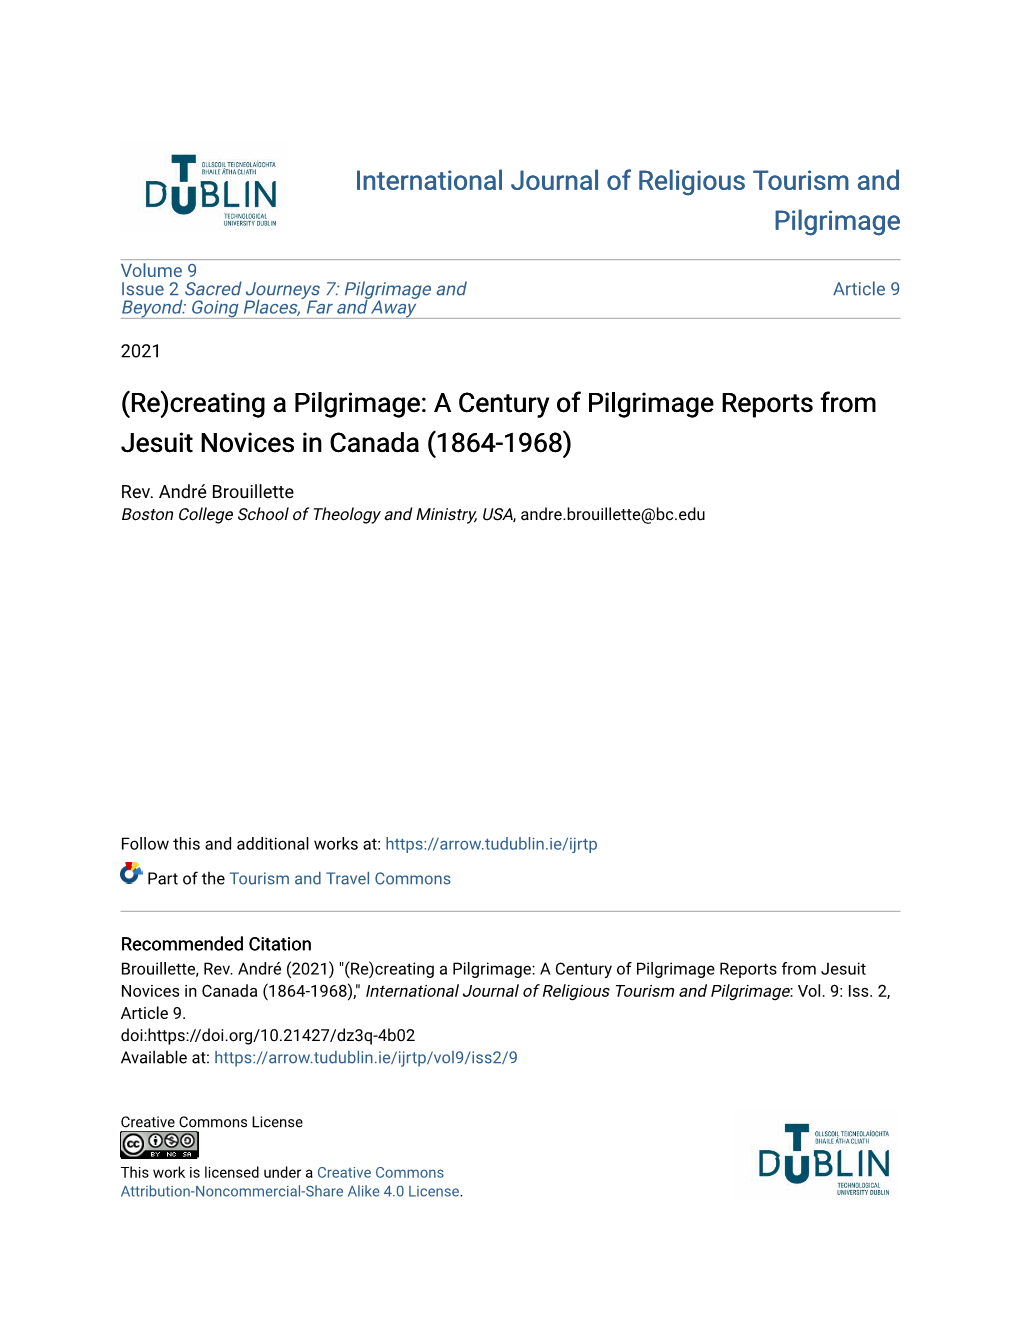 A Century of Pilgrimage Reports from Jesuit Novices in Canada (1864-1968)